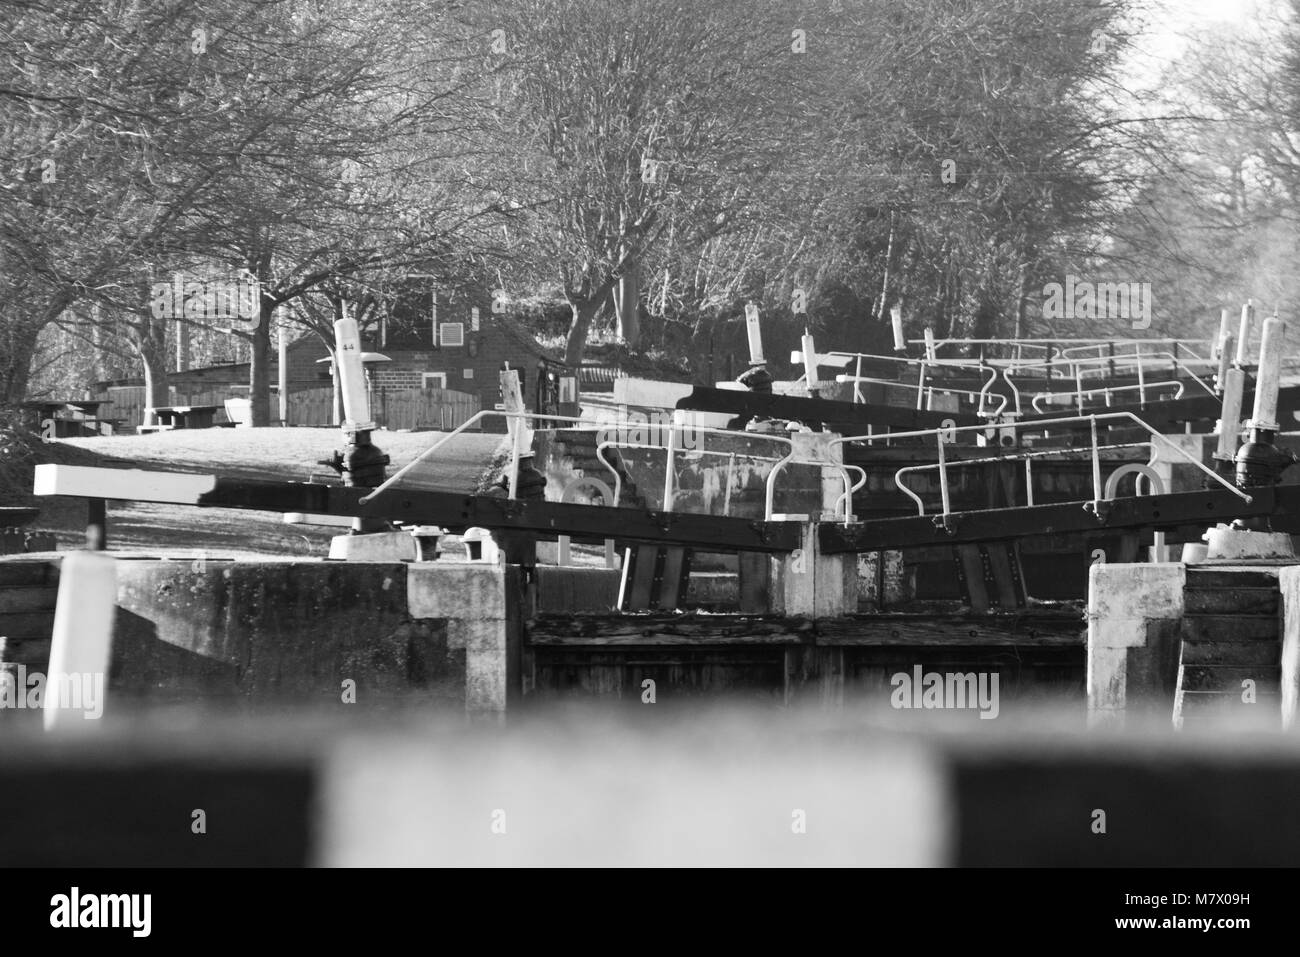 Long flight of locks in Warwickshire at Hatton on the Stratford to Birmingham canal Stock Photo